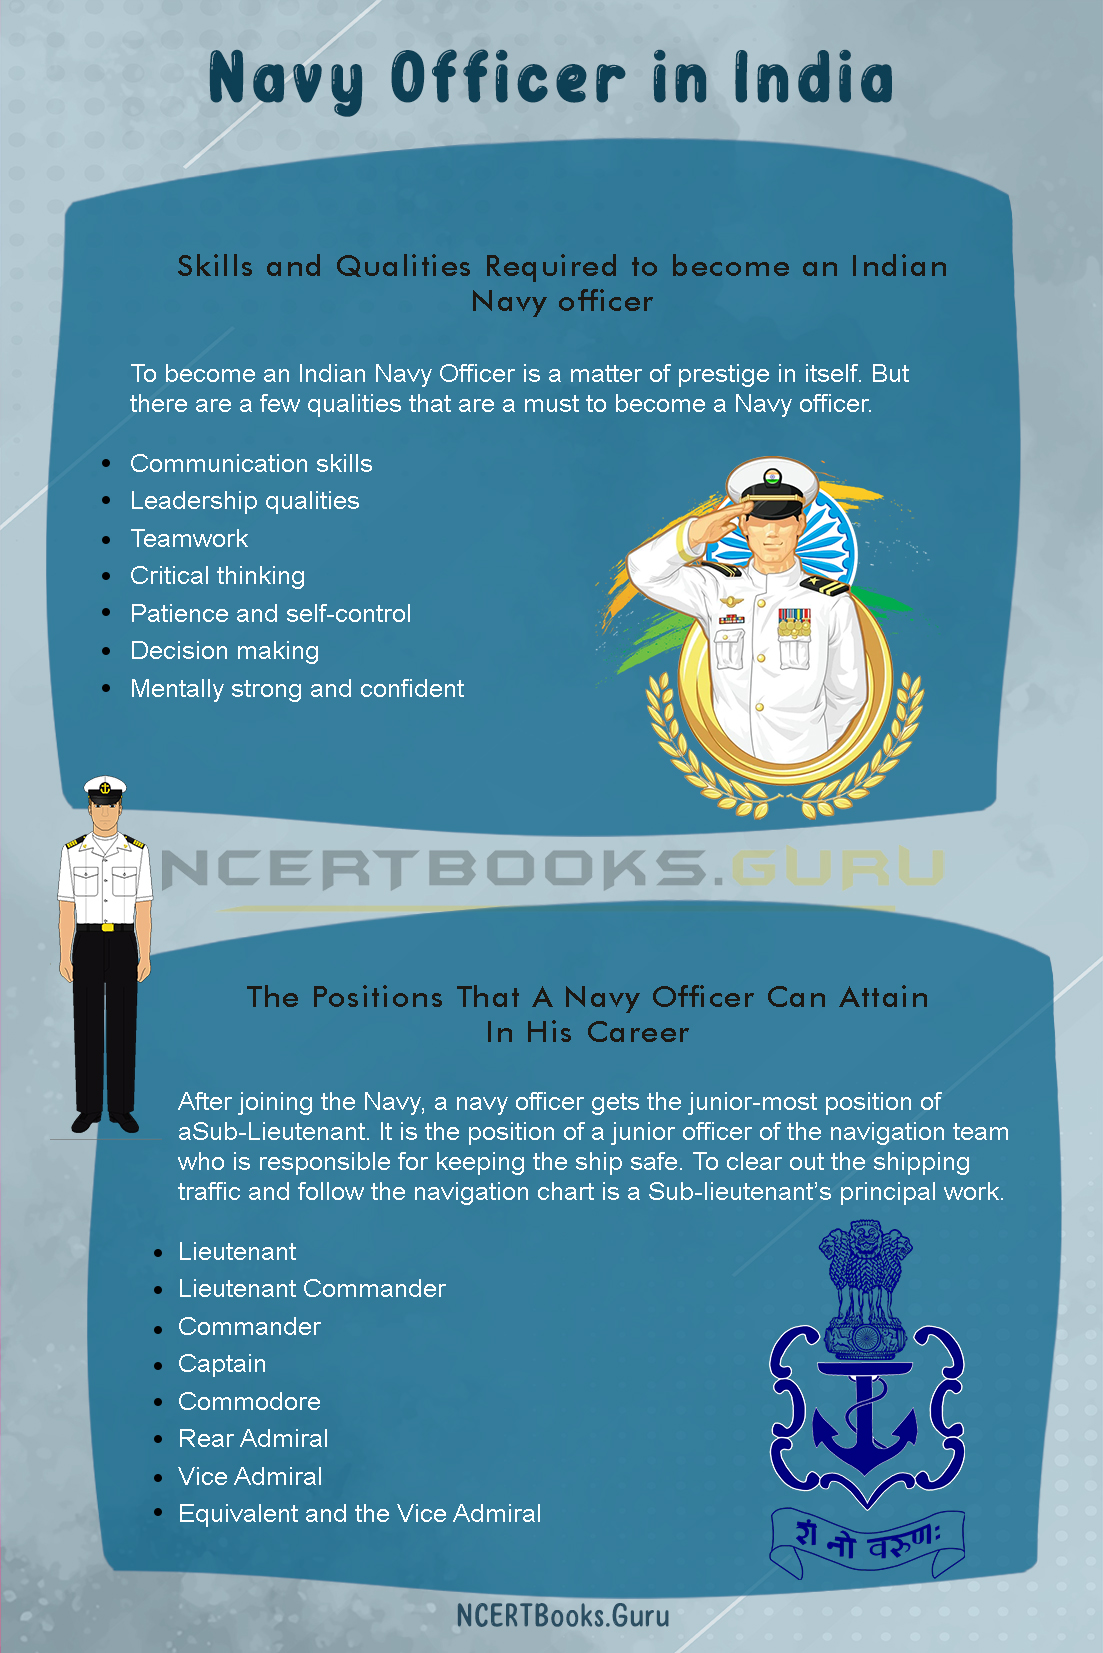 How to Become a Navy Officer in India